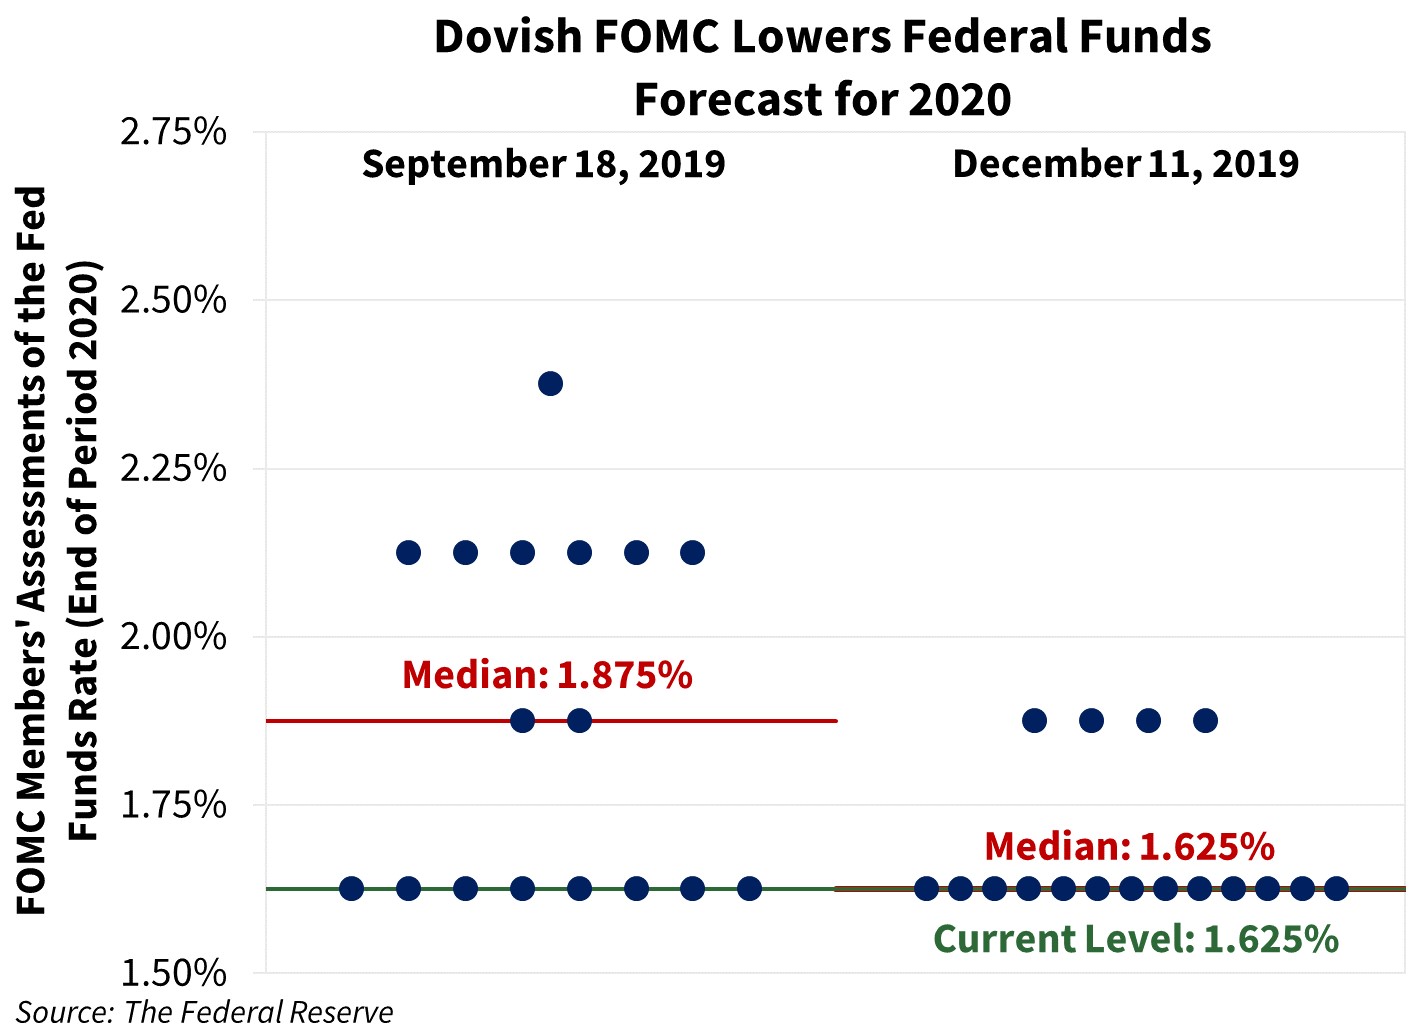 Dovish FOMC Lowers Federal Funds Forecast for 2020